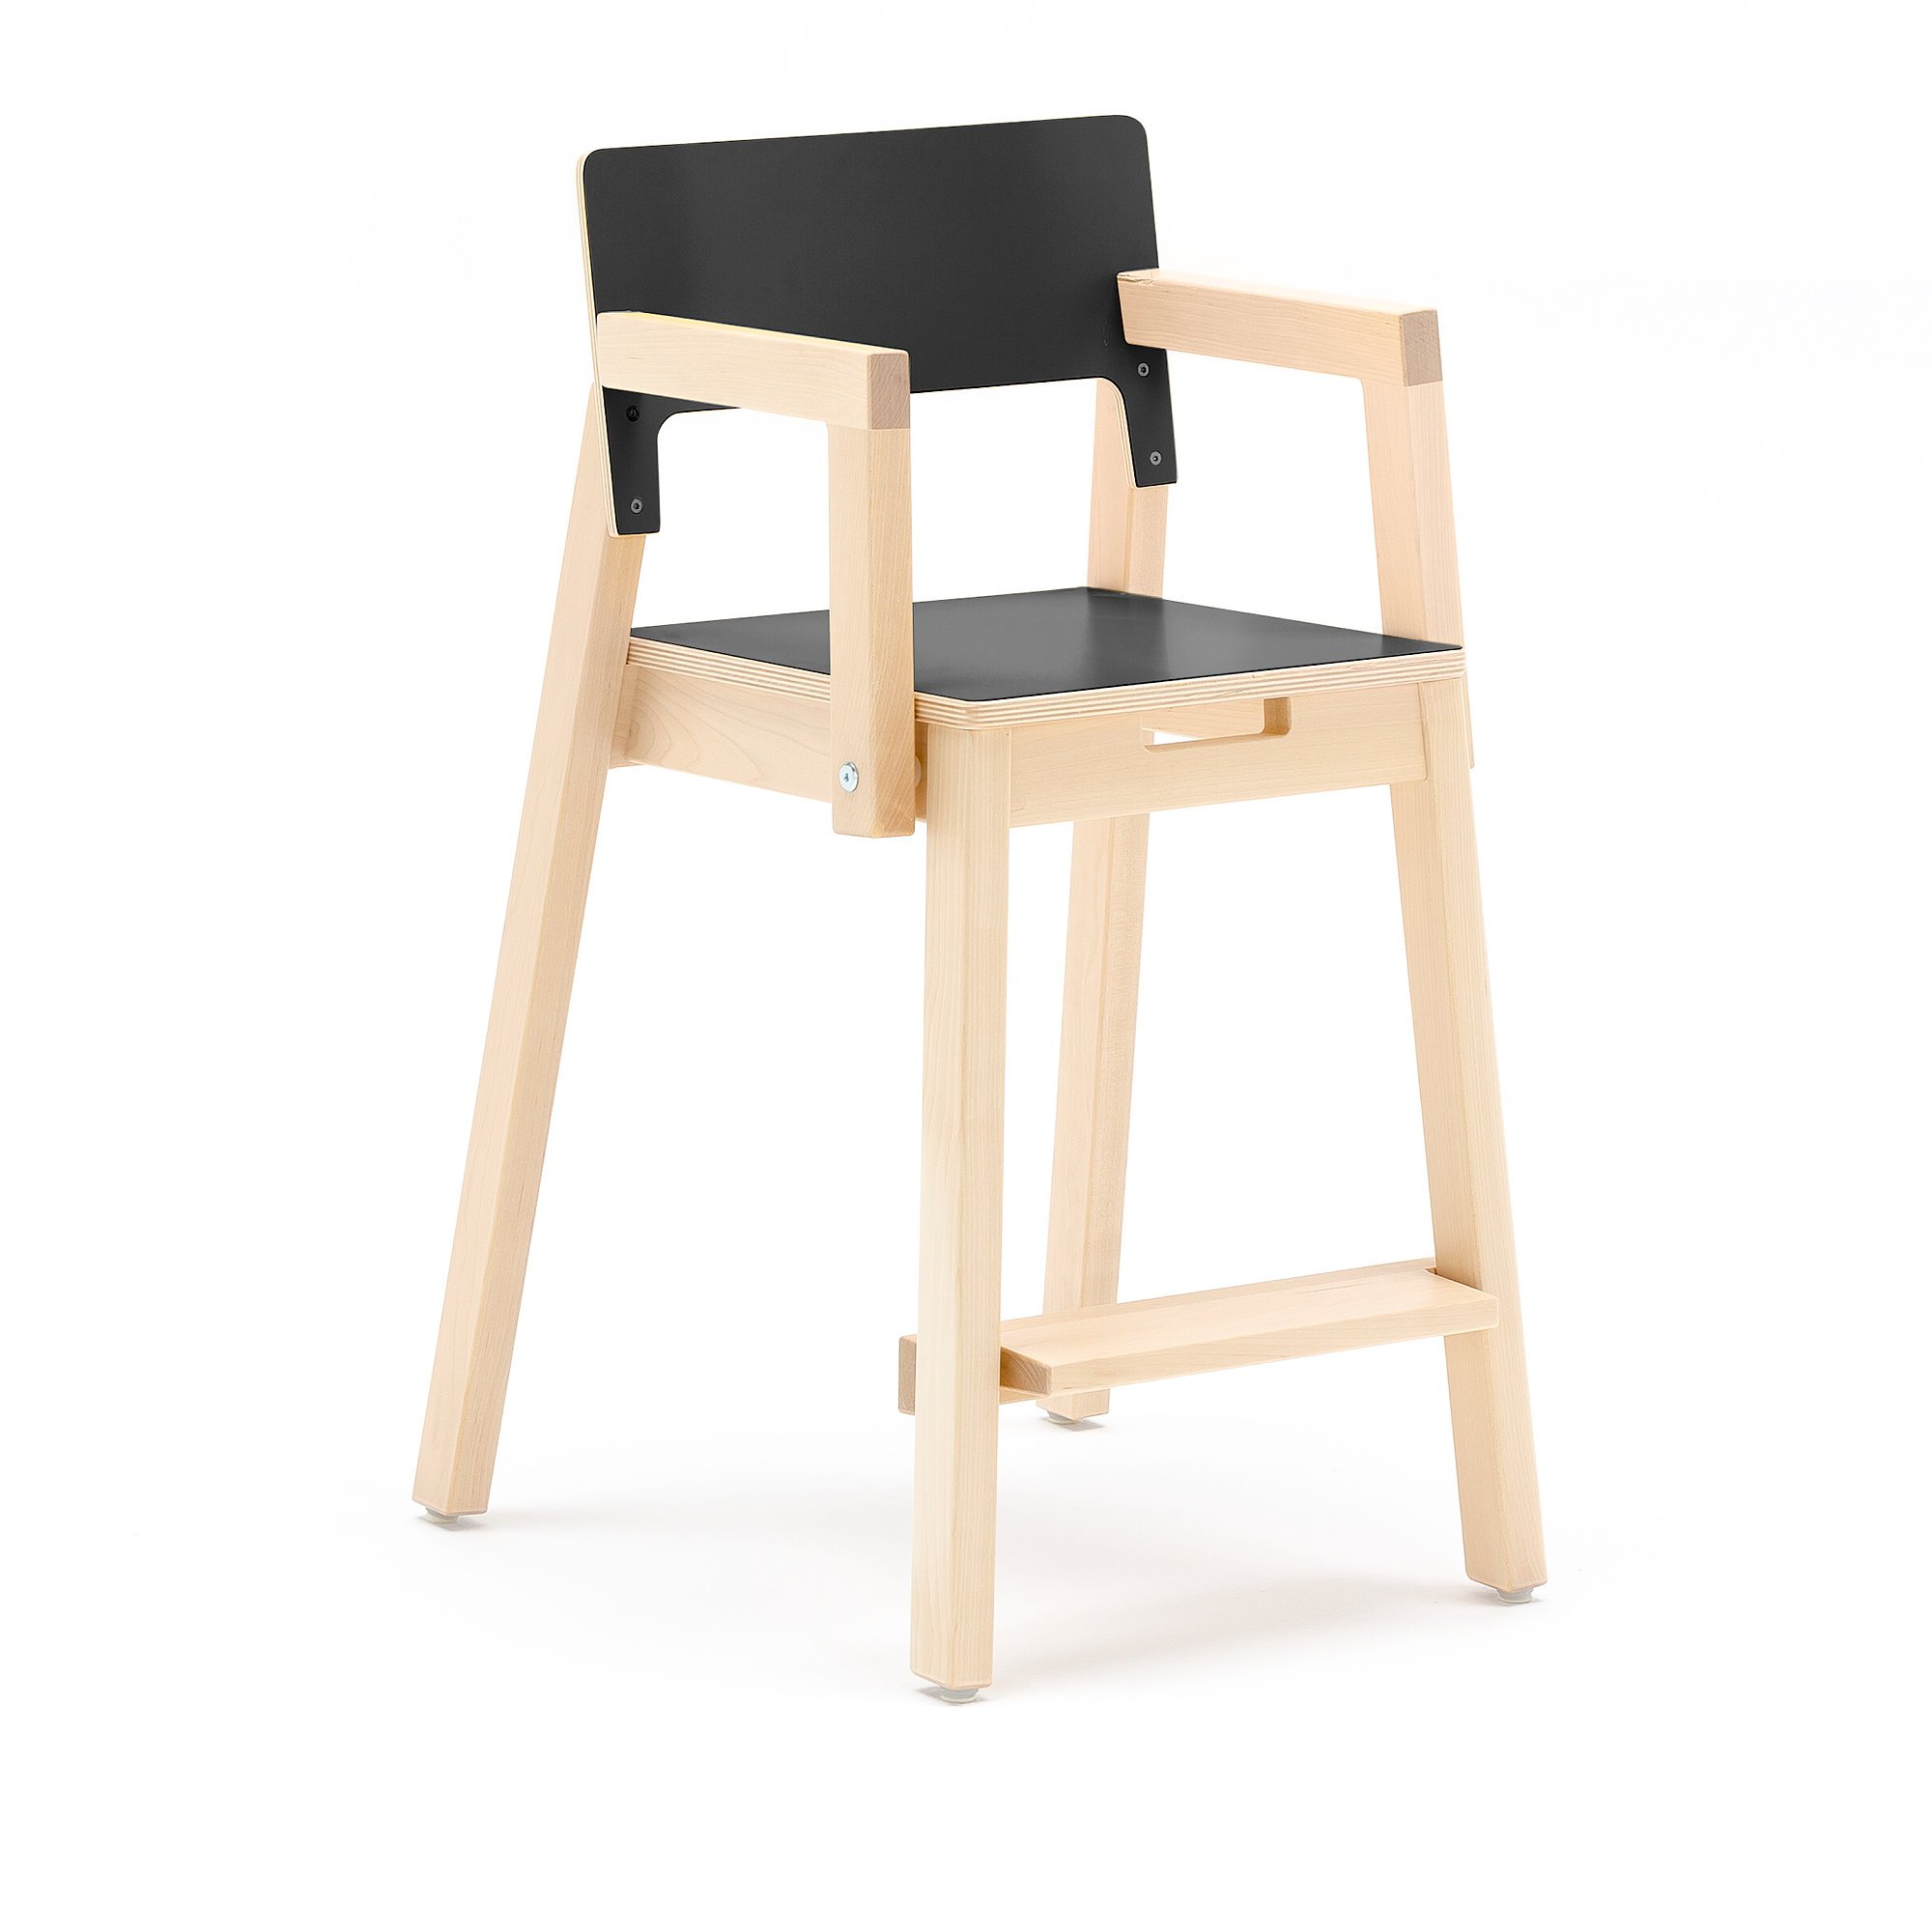 Tall children's chair LOVE with armrests, H 500 mm, birch, black laminate